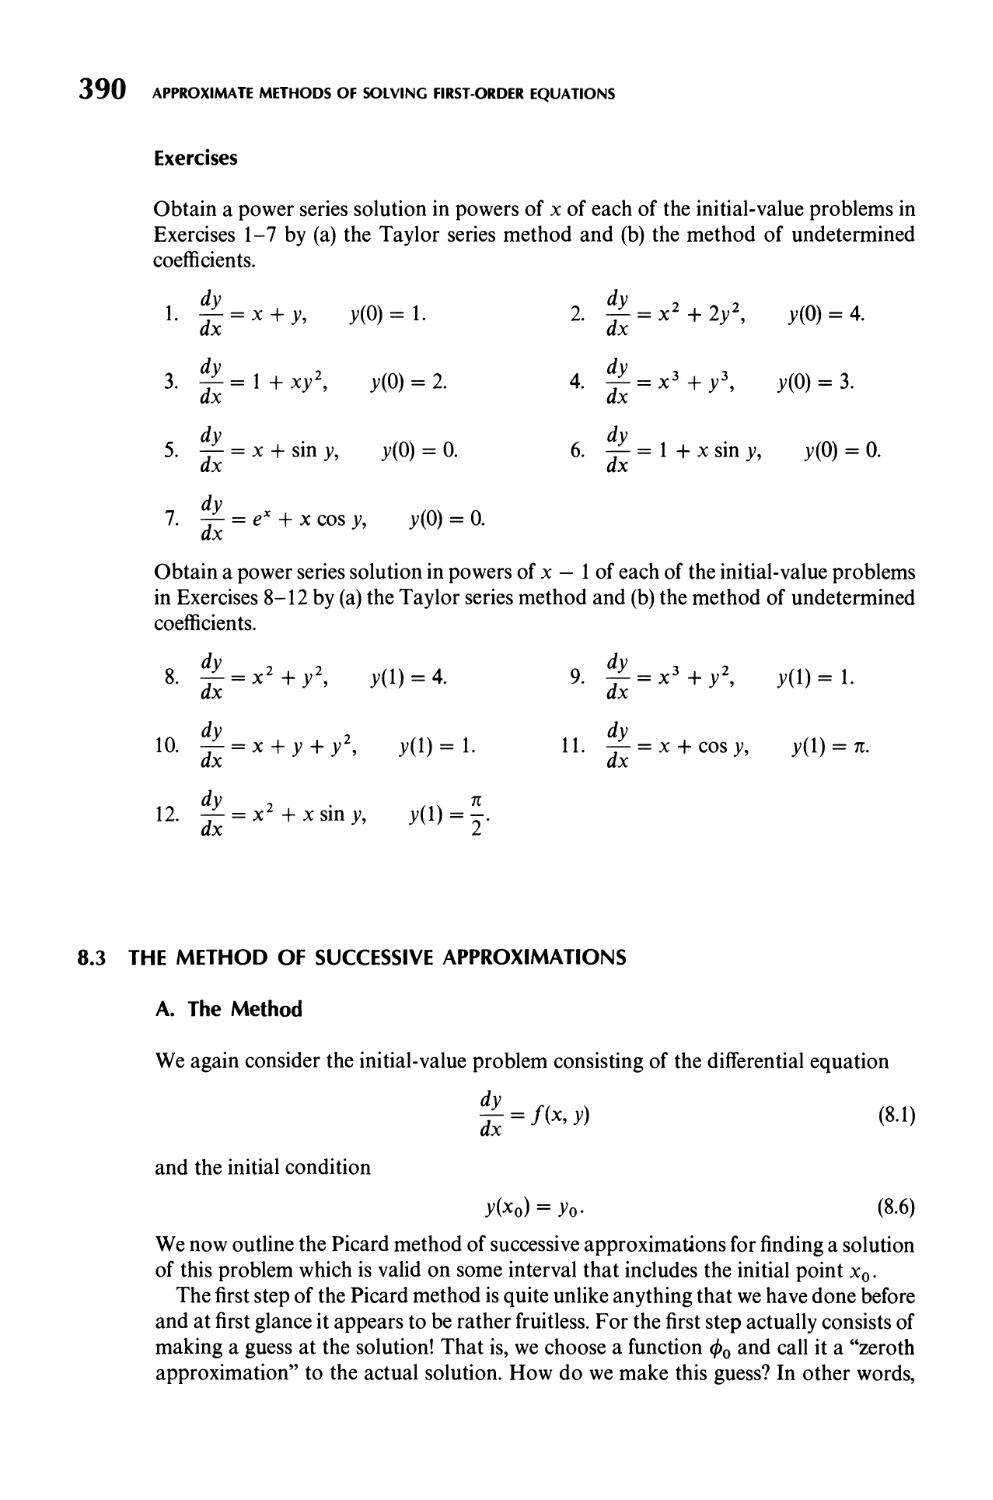 8.3  The Method of Successive Approximations